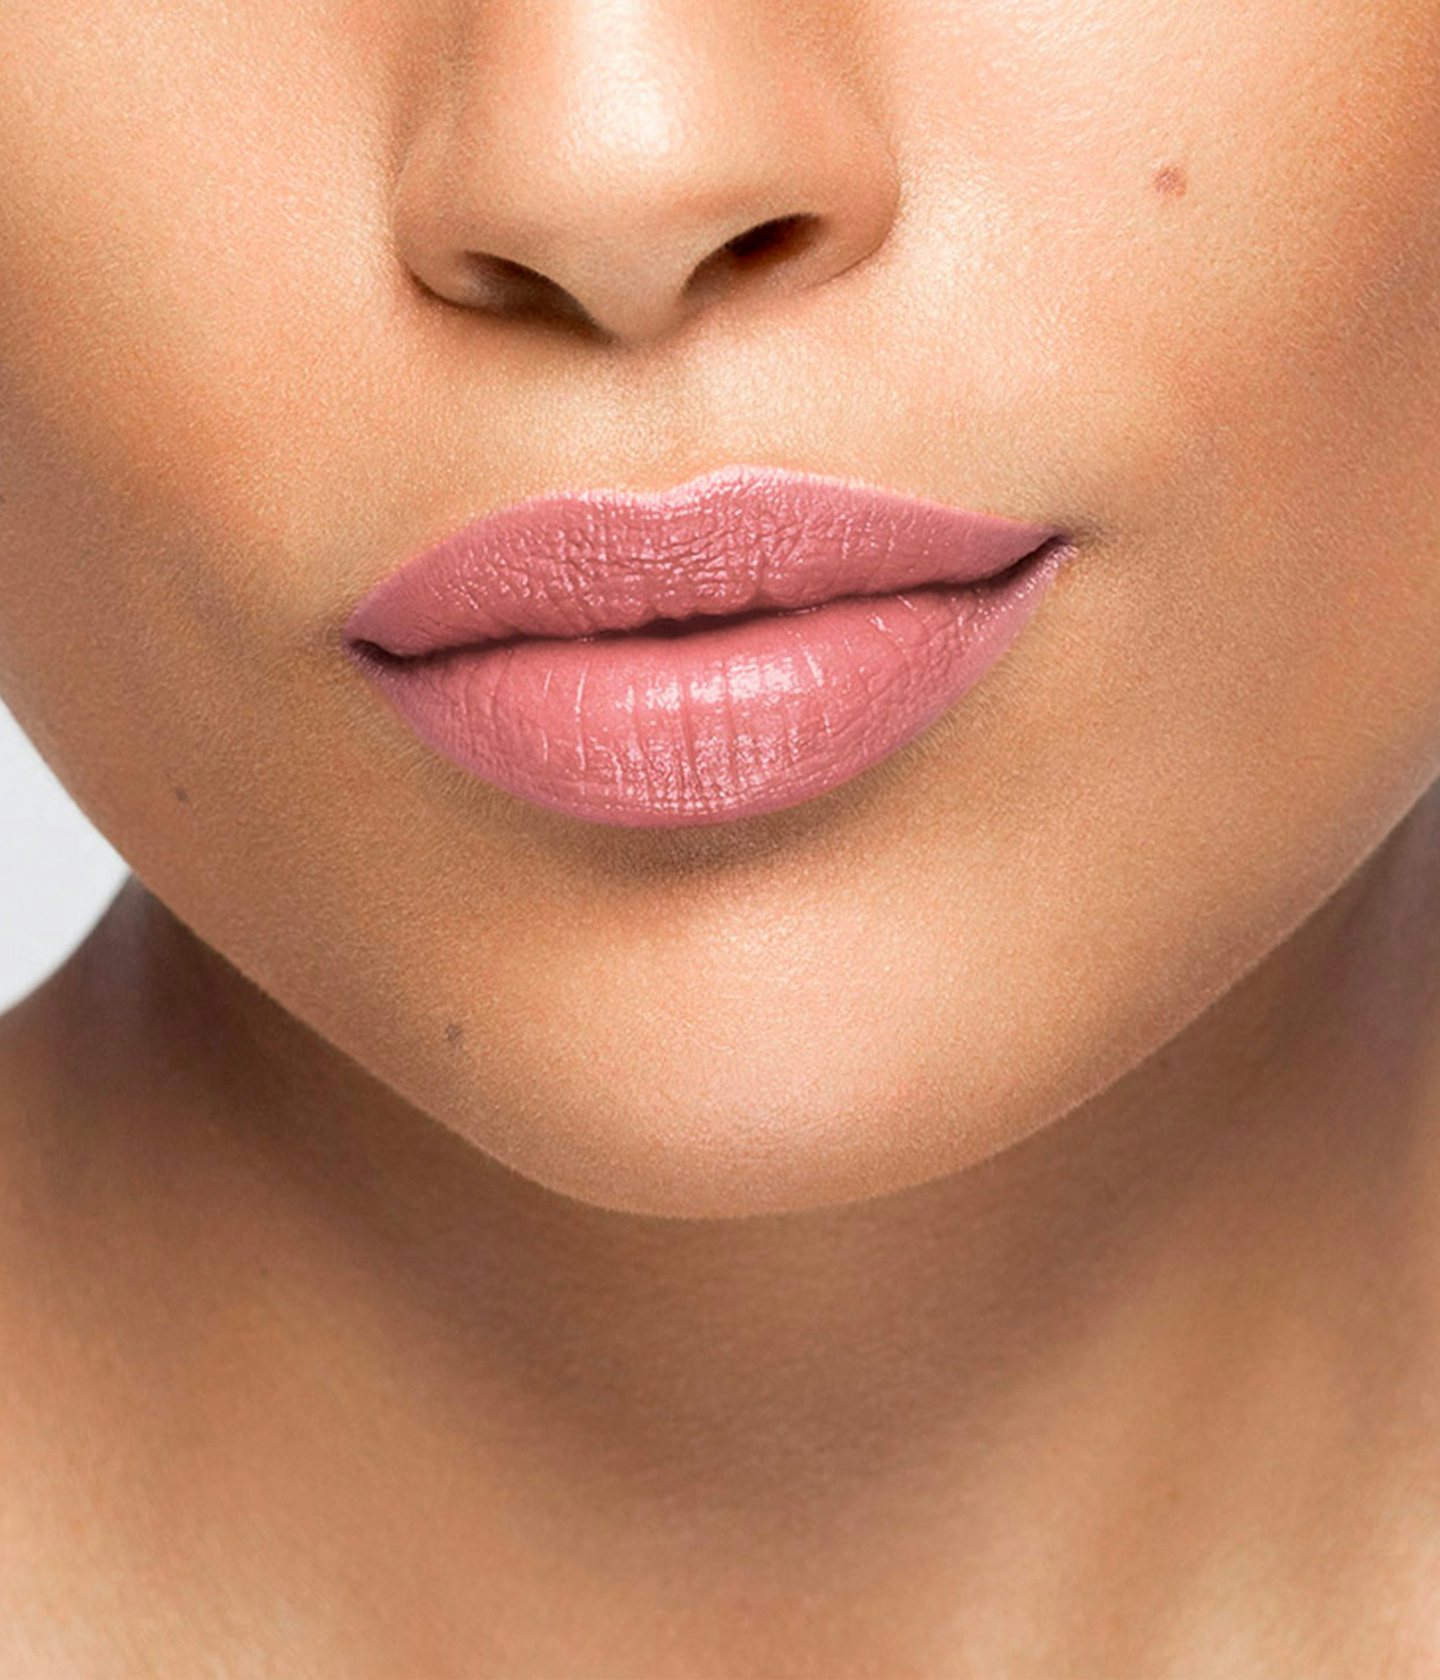 La bouche rouge The Aime lipstick shade on the lips of an medium skin model